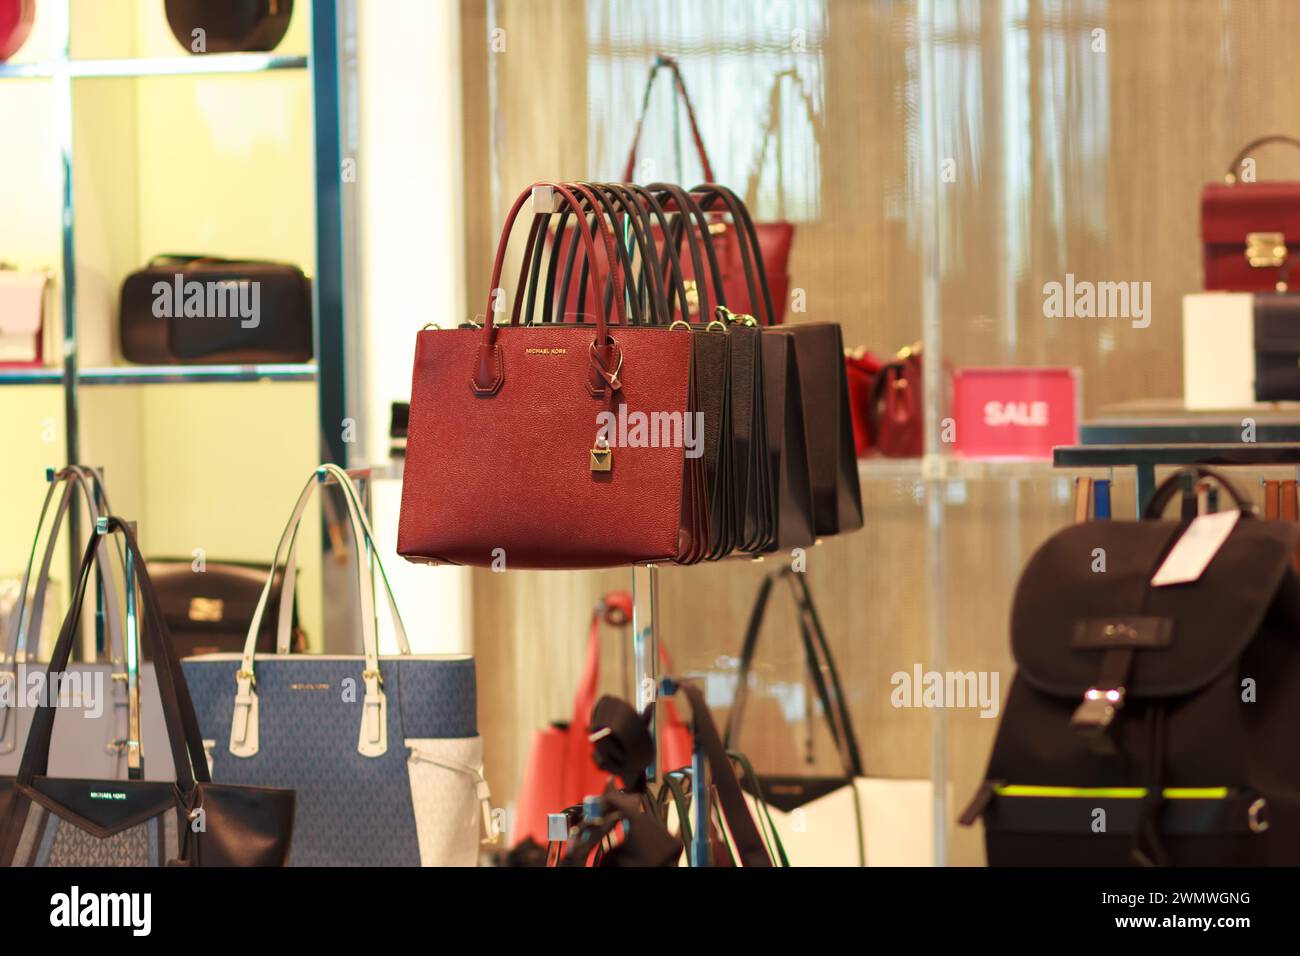 The Brand Shop With Fashionable Luxury Bags Of Michael Kors Collection. Stock Photo